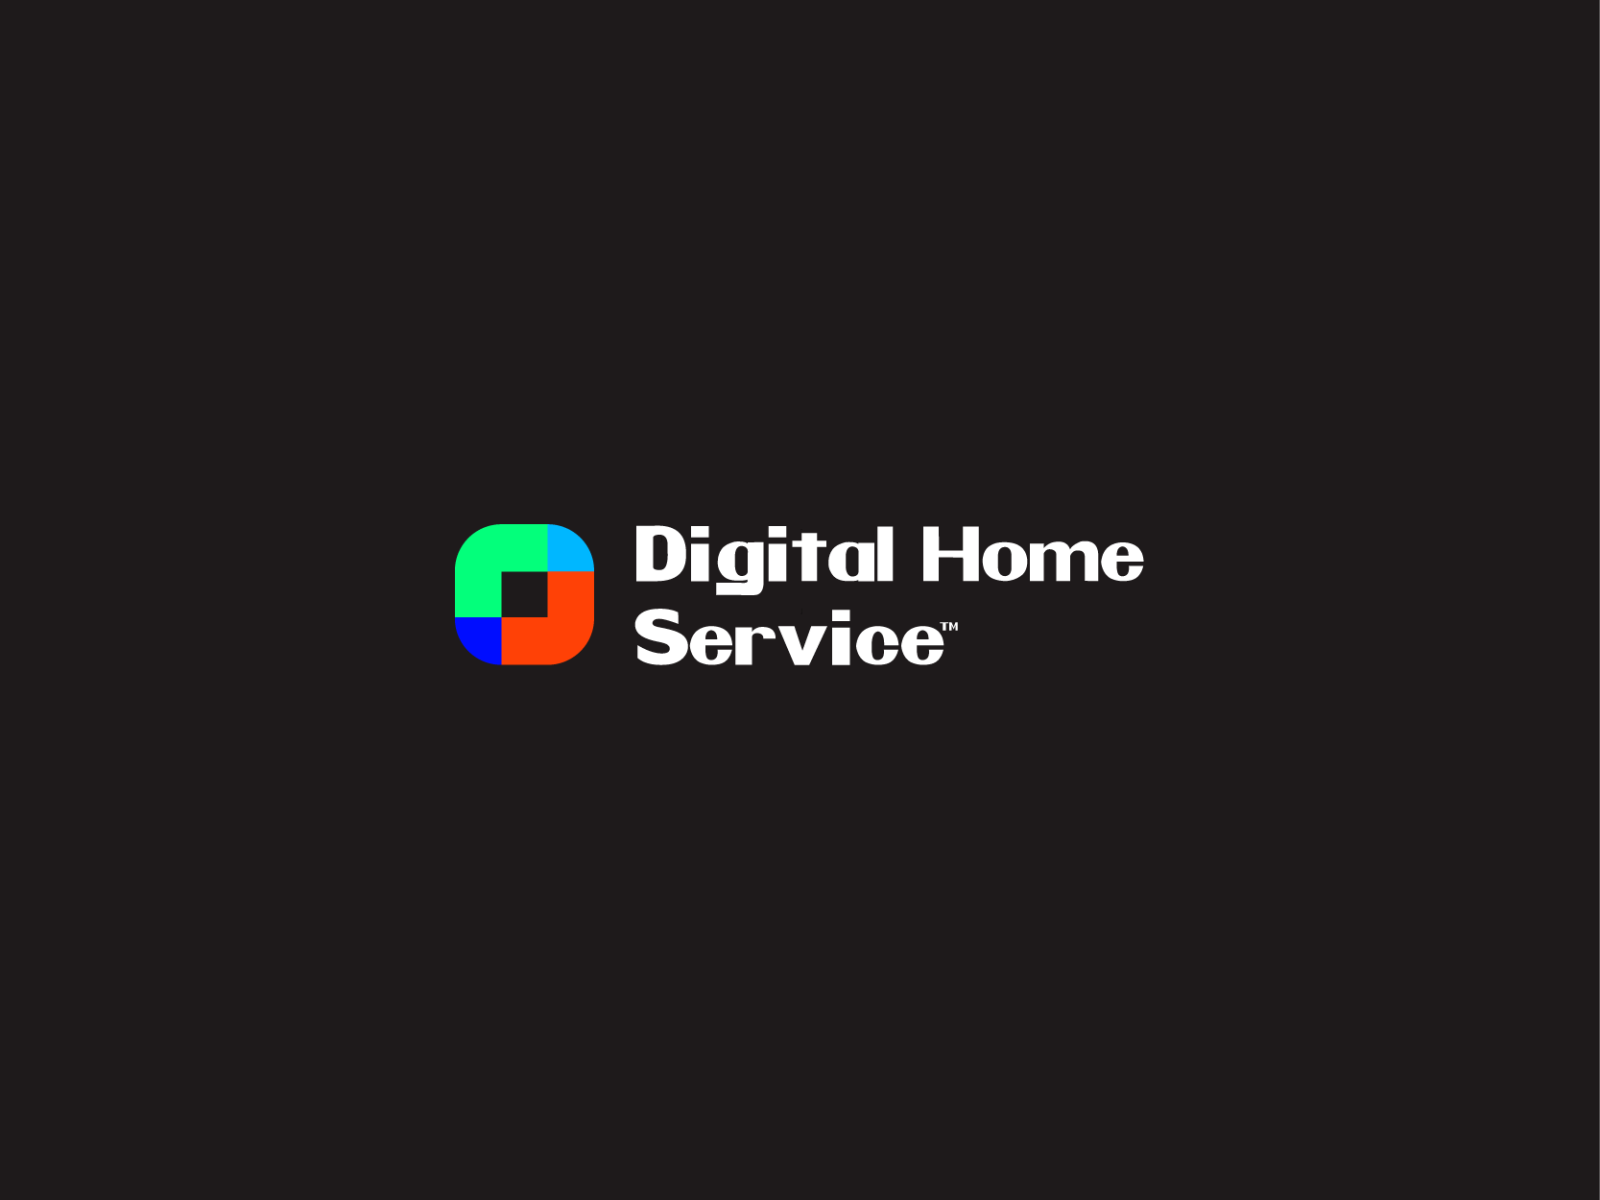 Digital Home Service by Lunarway on Dribbble